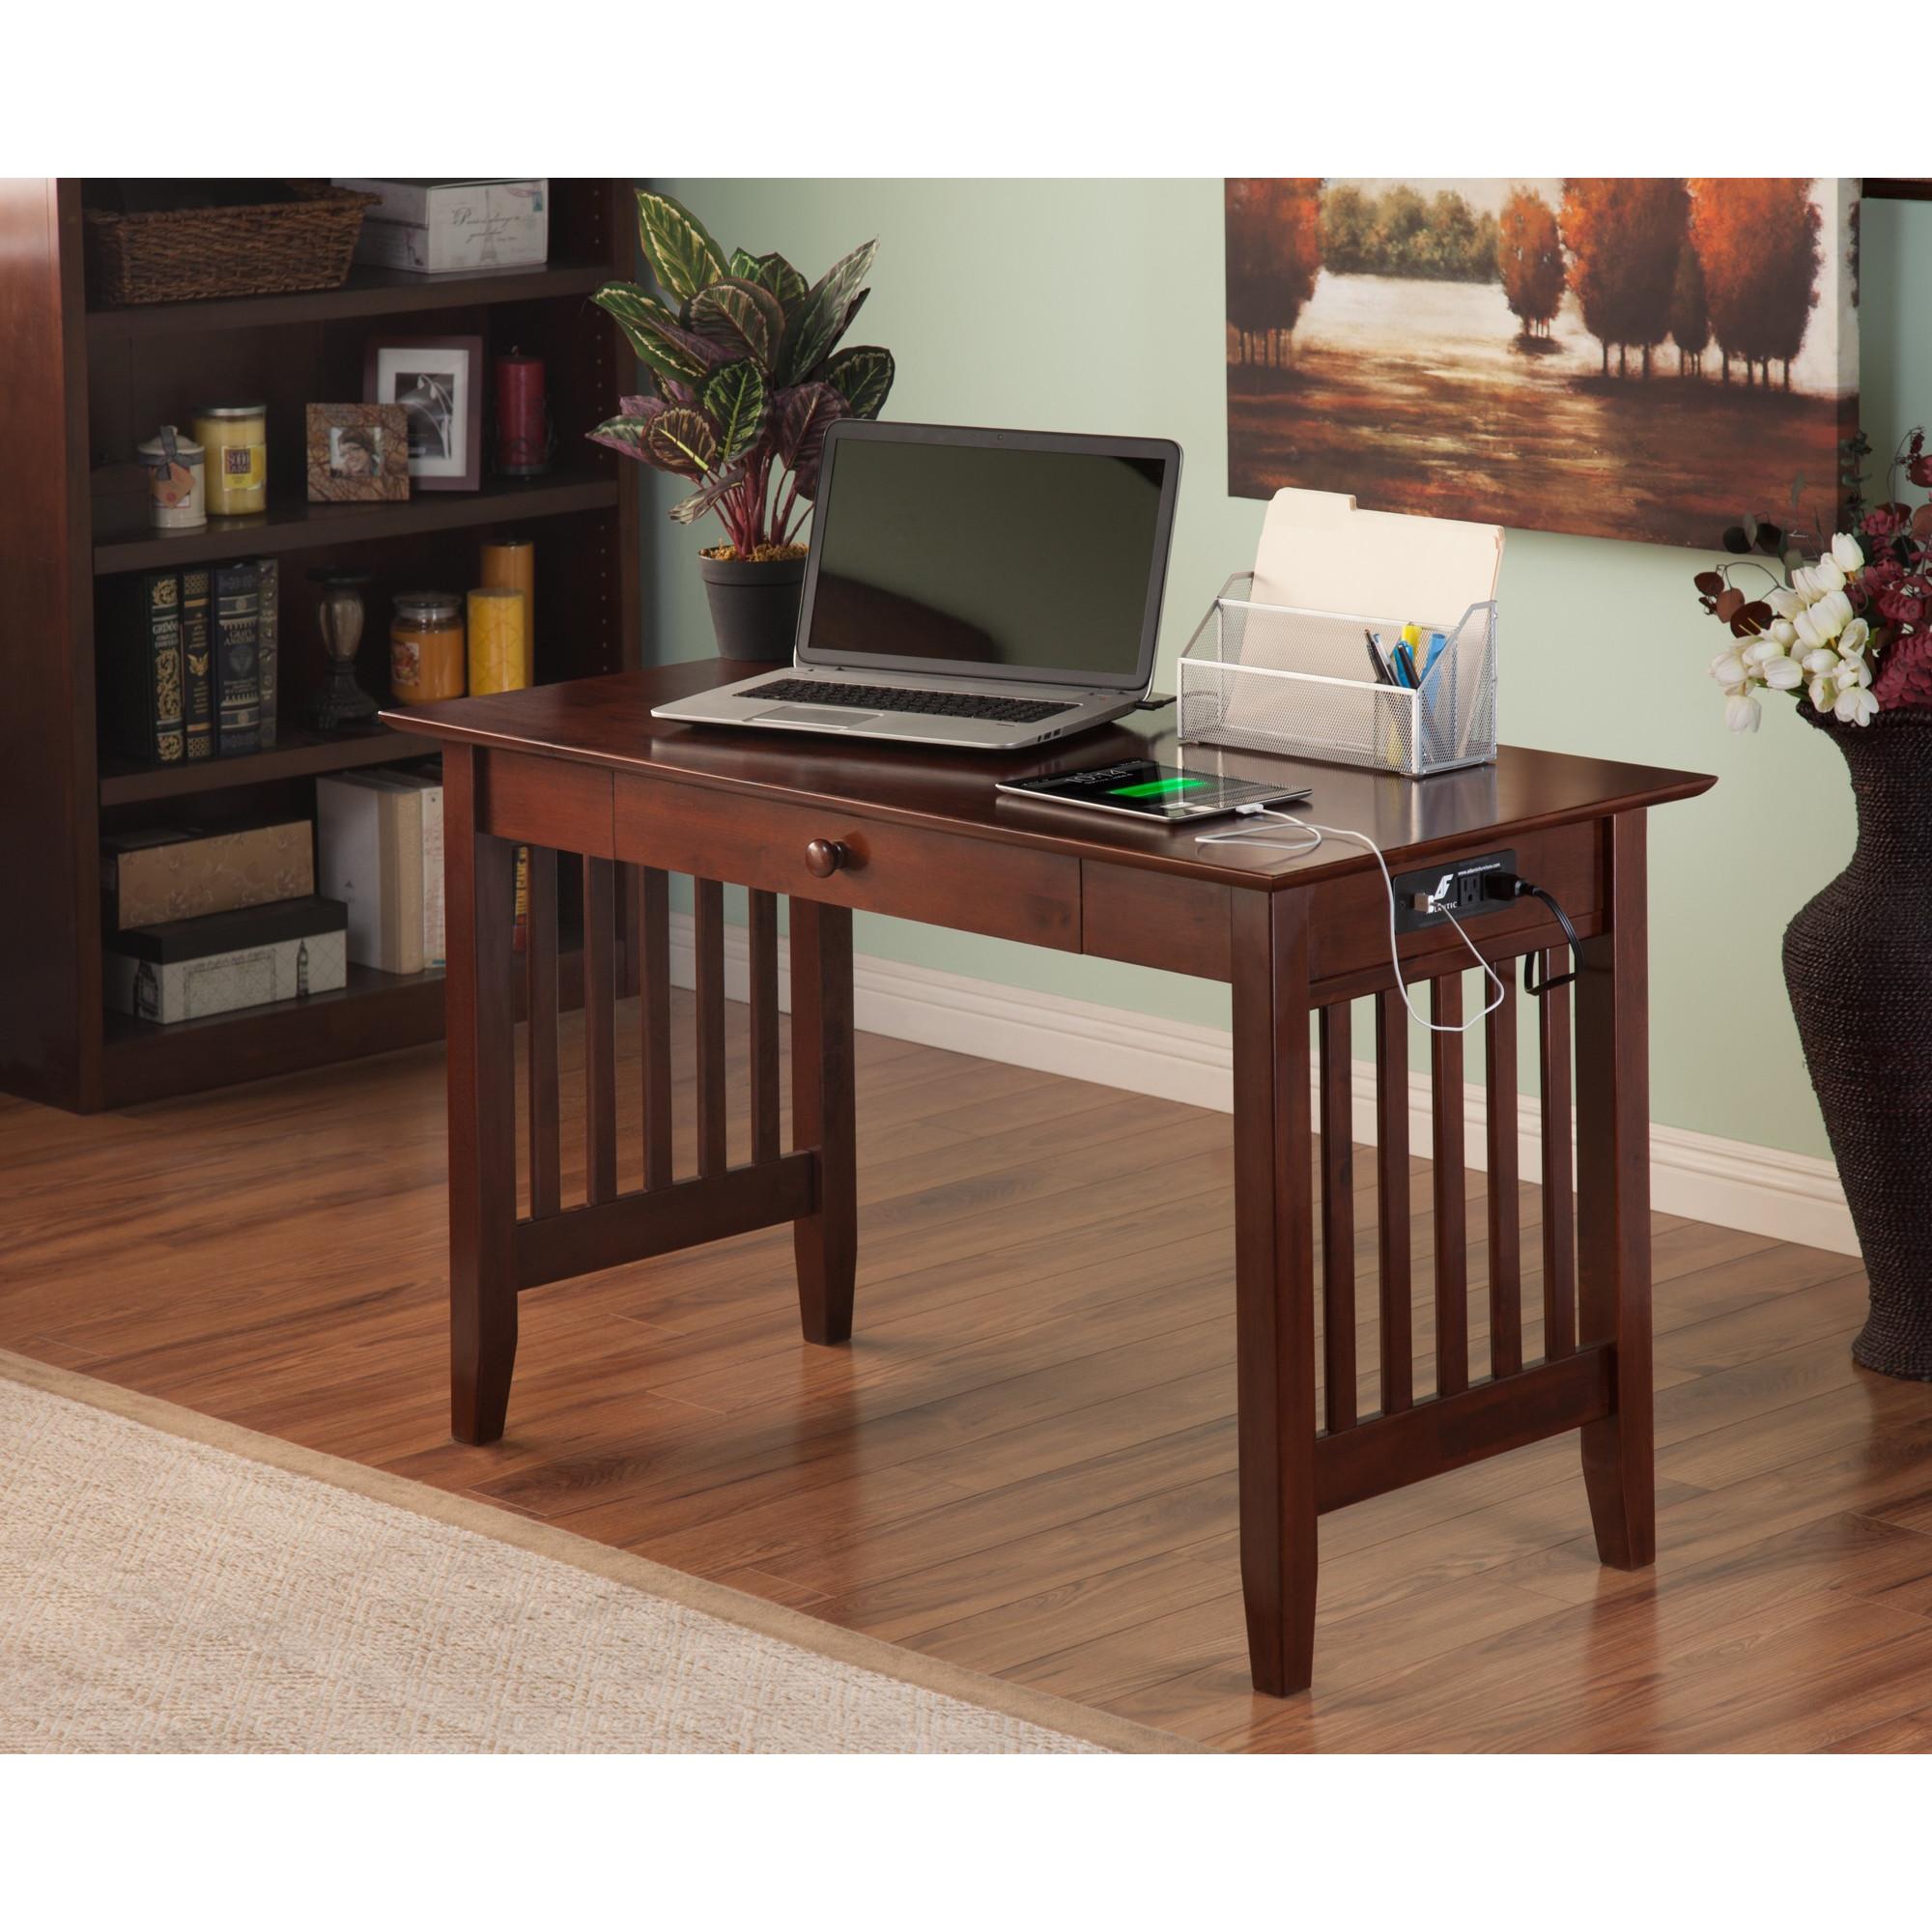 Mission Desk with Drawer and Charging Station in Walnut or Caramel - image 3 of 8